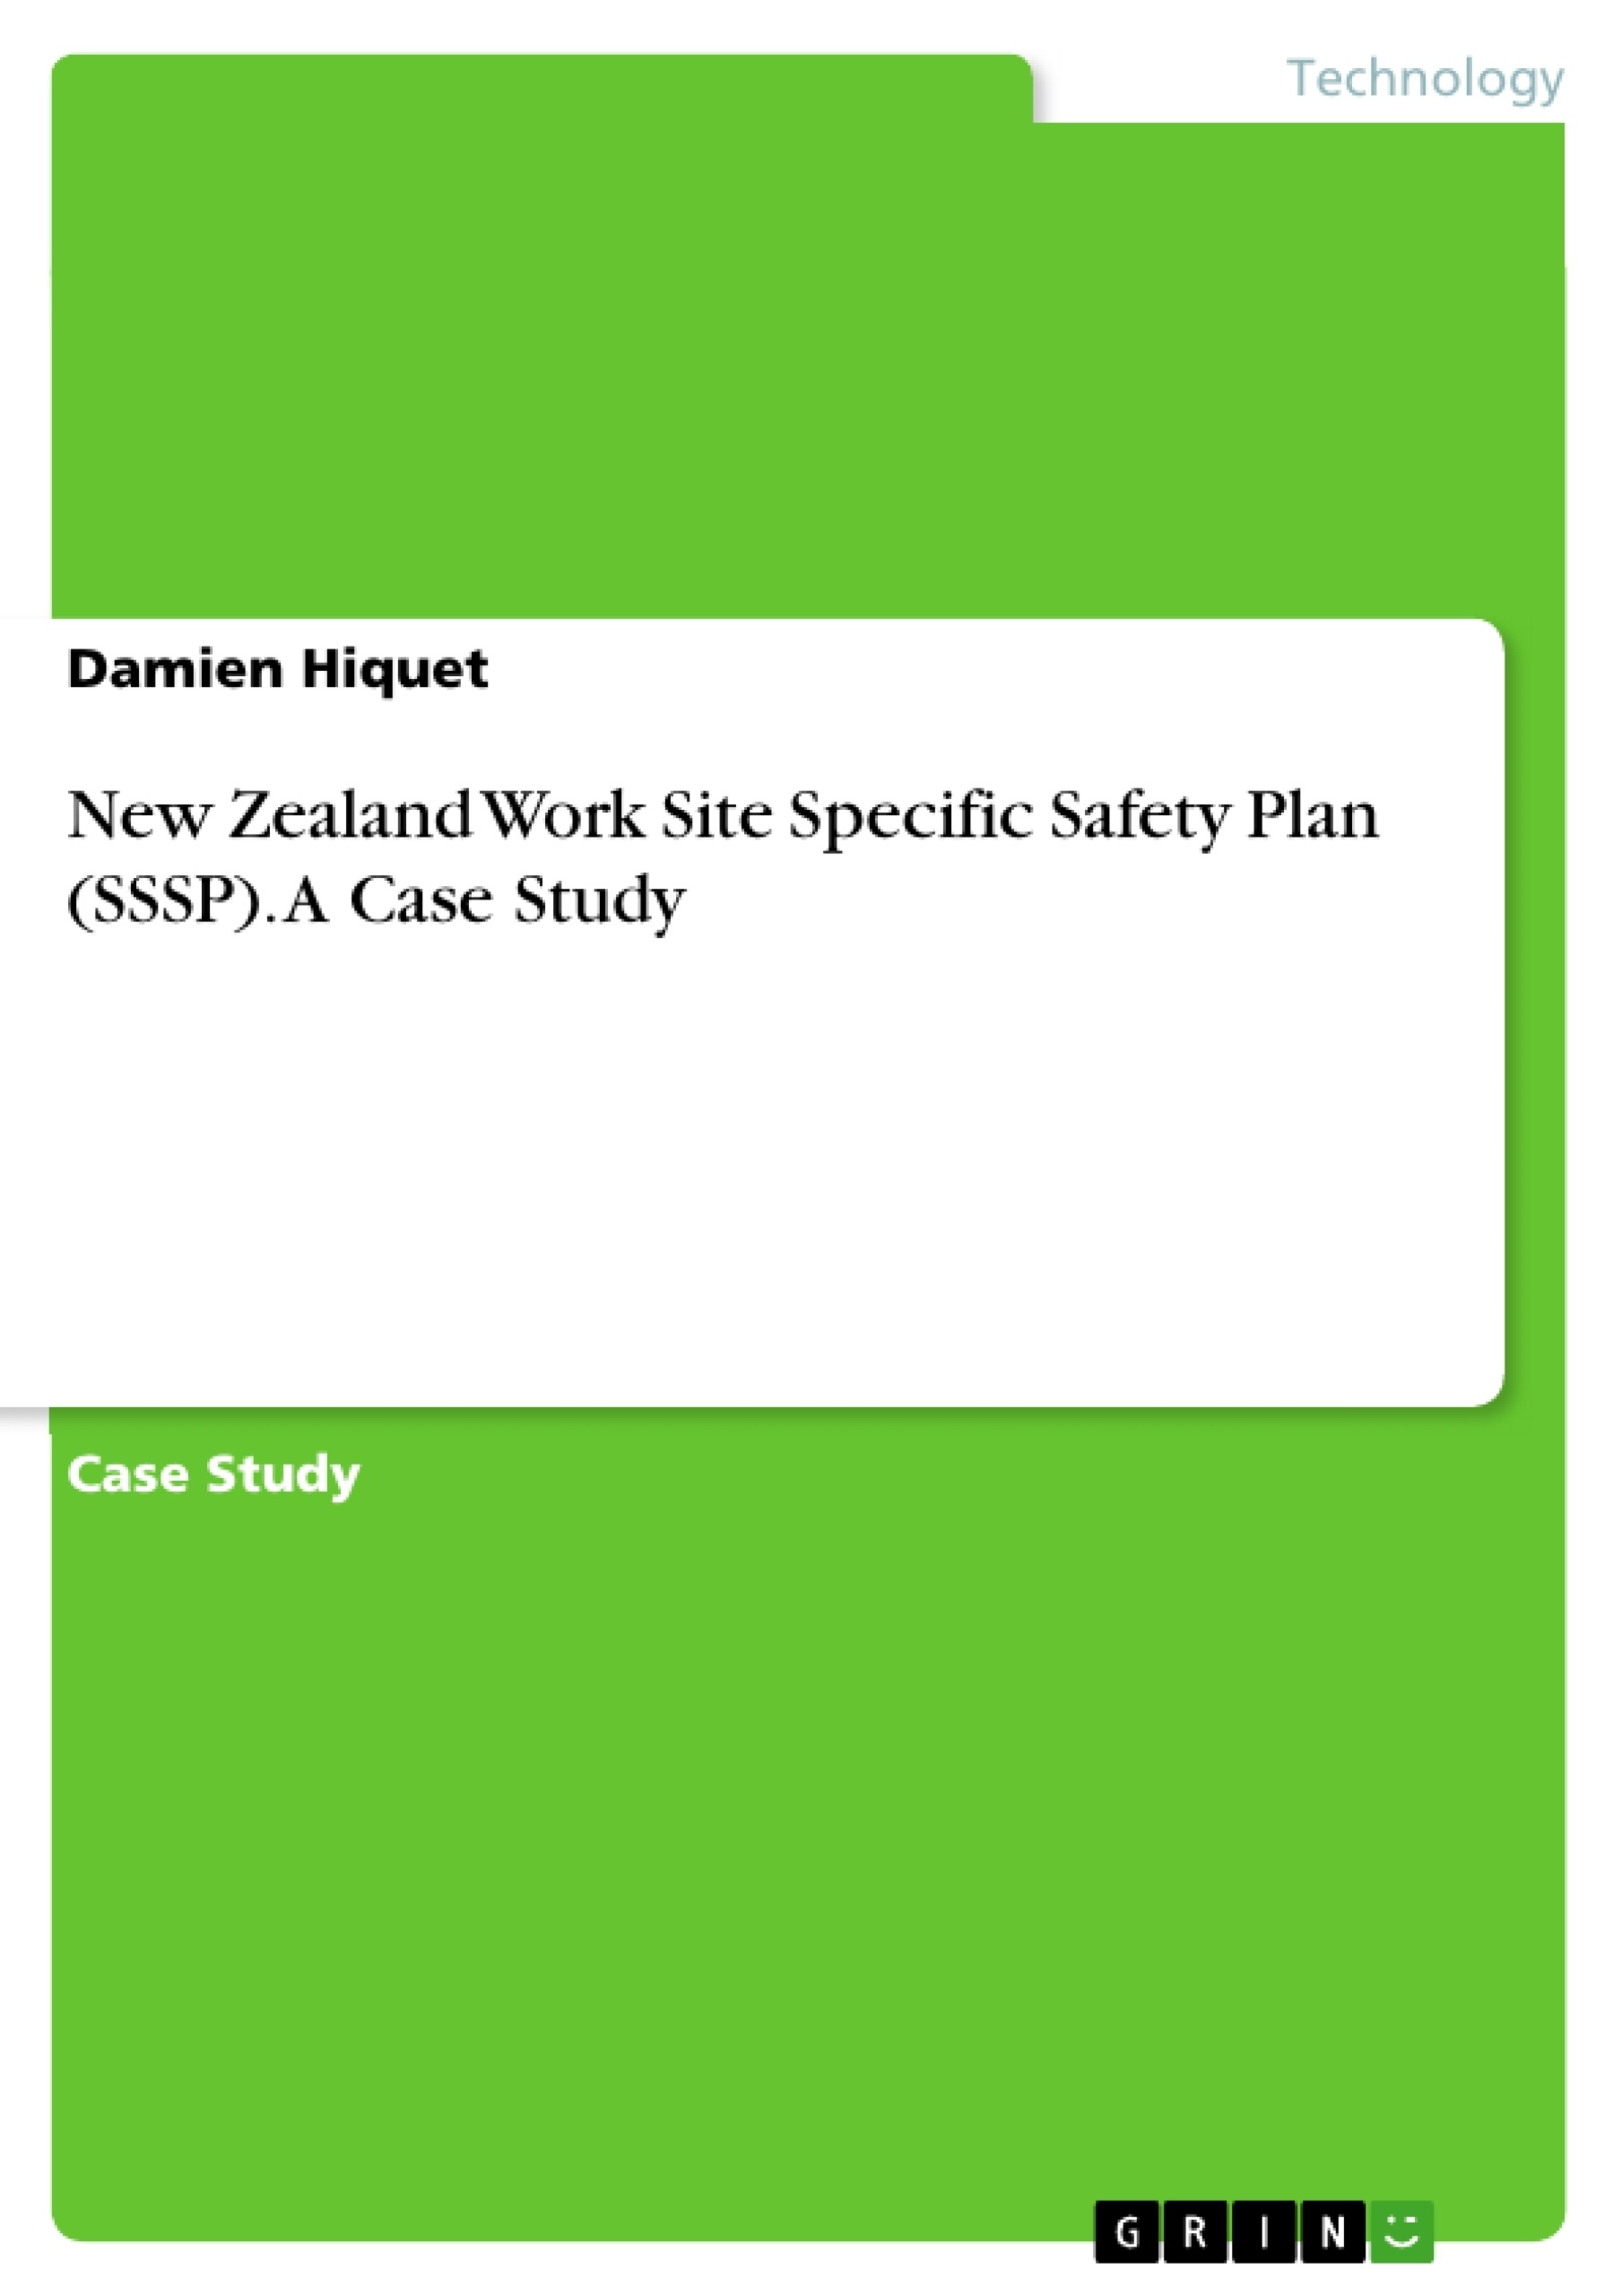 Title: New Zealand Work Site Specific Safety Plan (SSSP). A Case Study